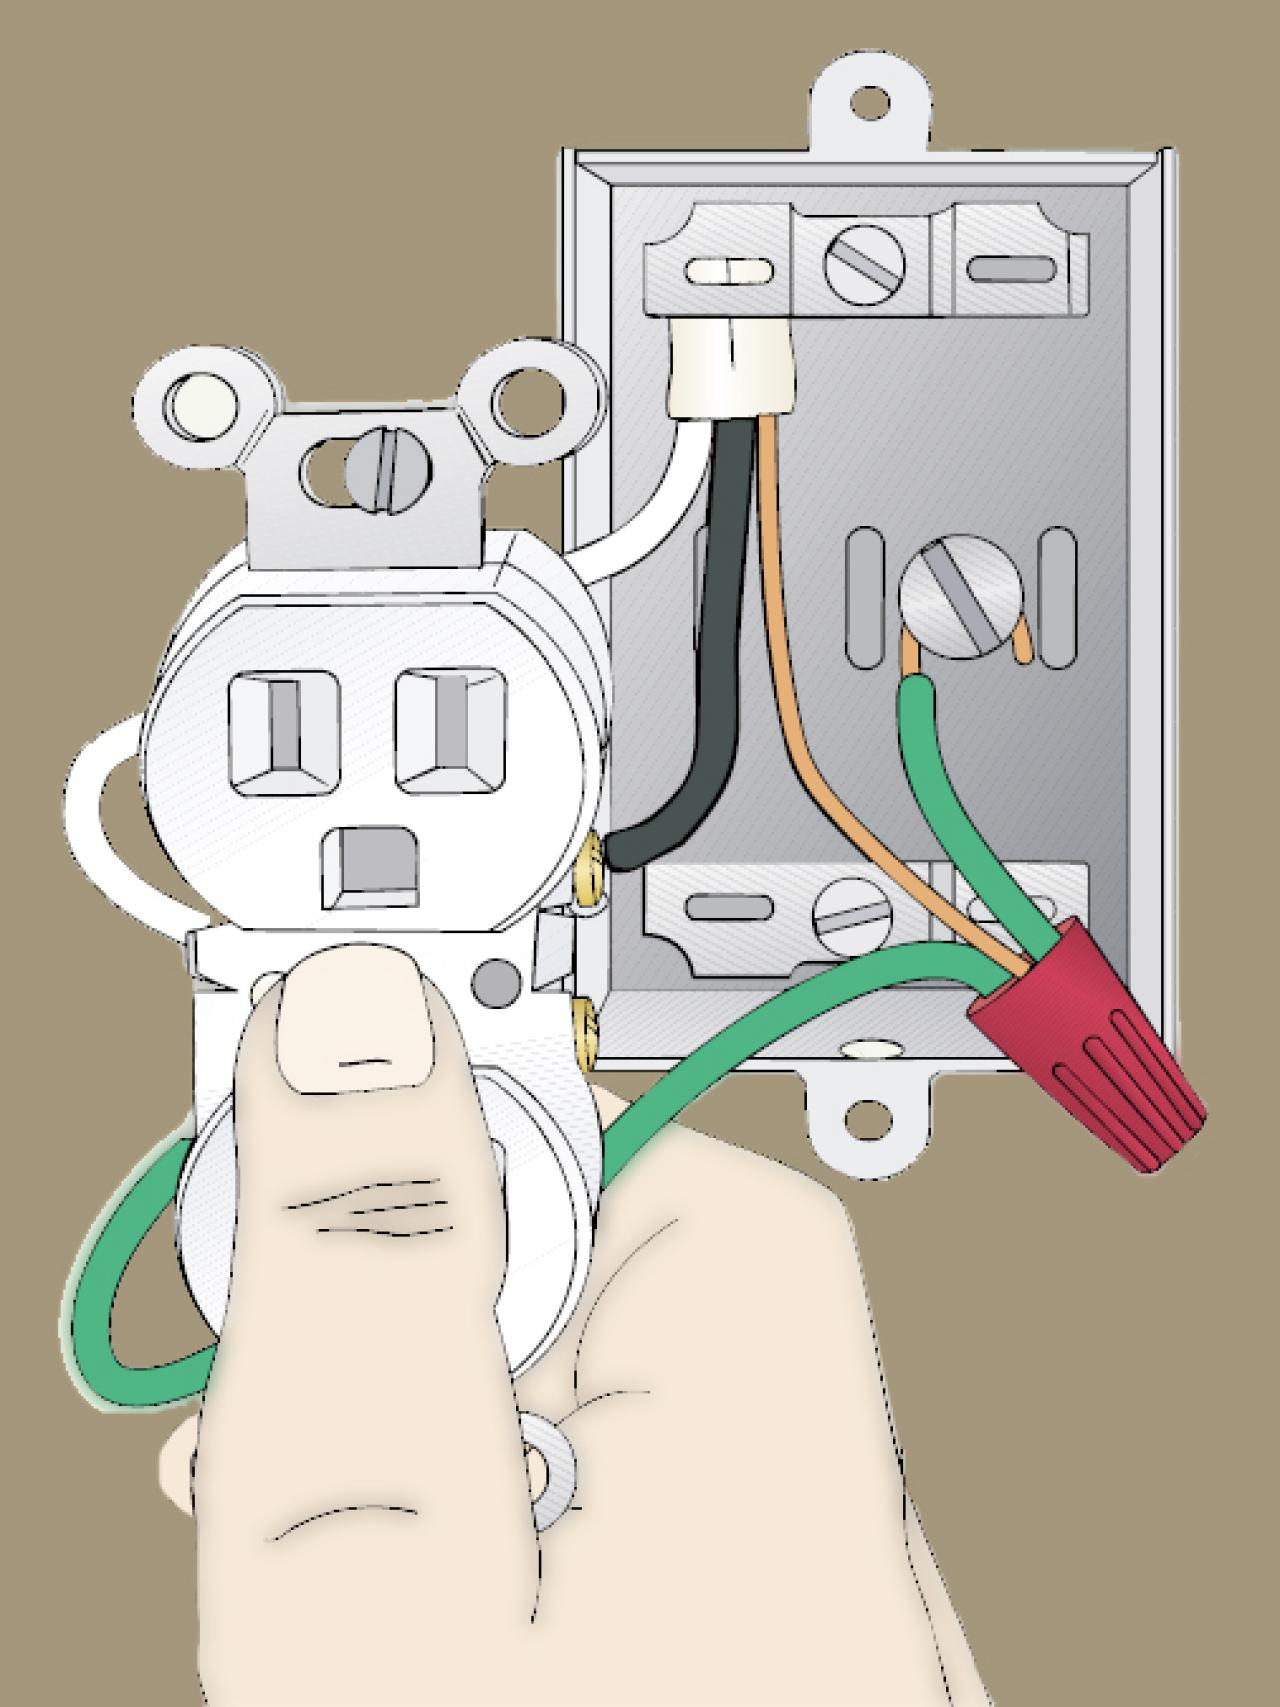 The Diffe Colored Electrical Wires, How To Do Basic Home Wiring